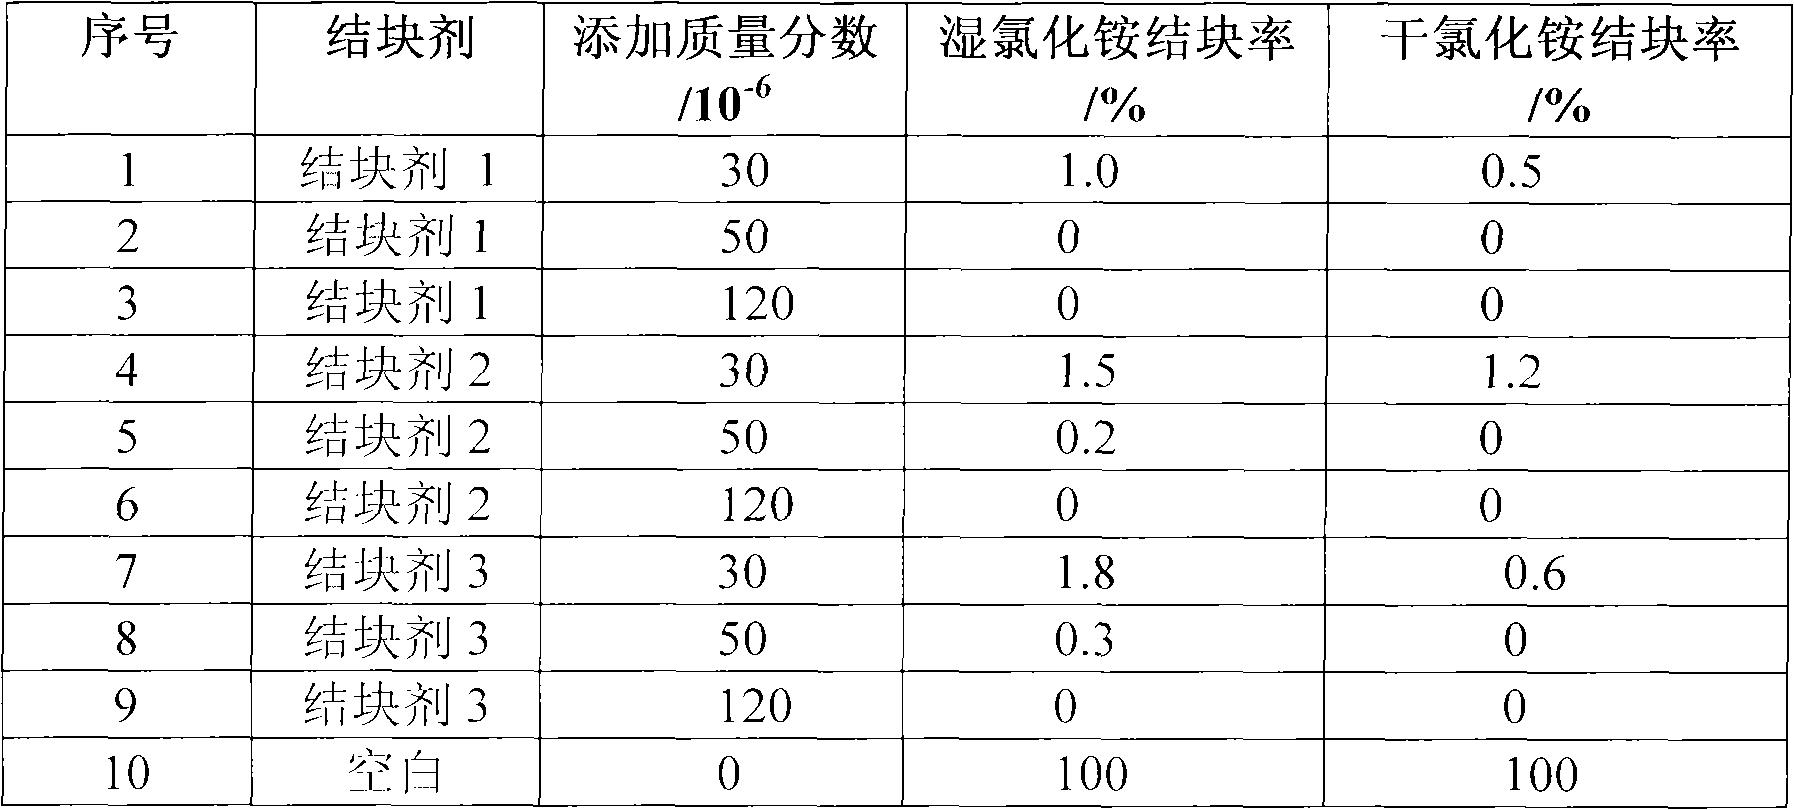 Ammonium chloride anti-blocking agent composition and application